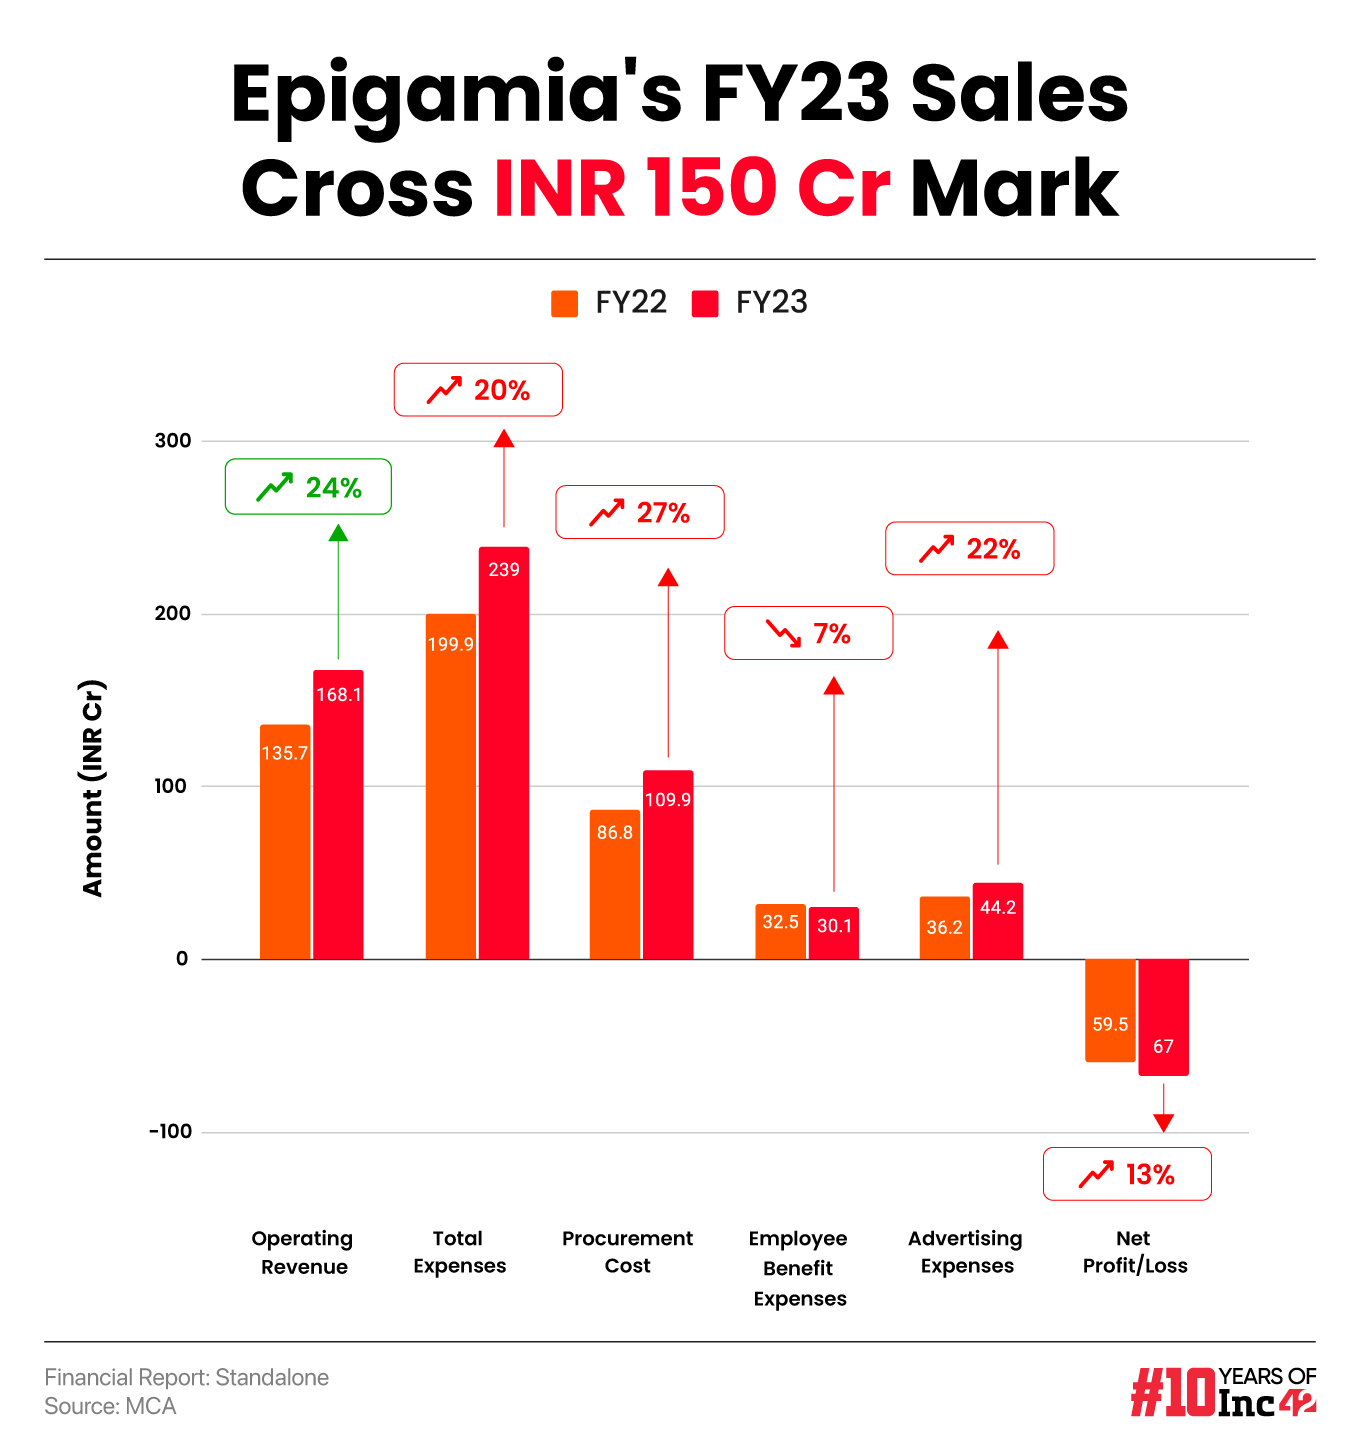 Deepika Padukone-Backed Epigamia’s Sales Cross INR 150 Cr Mark In FY23